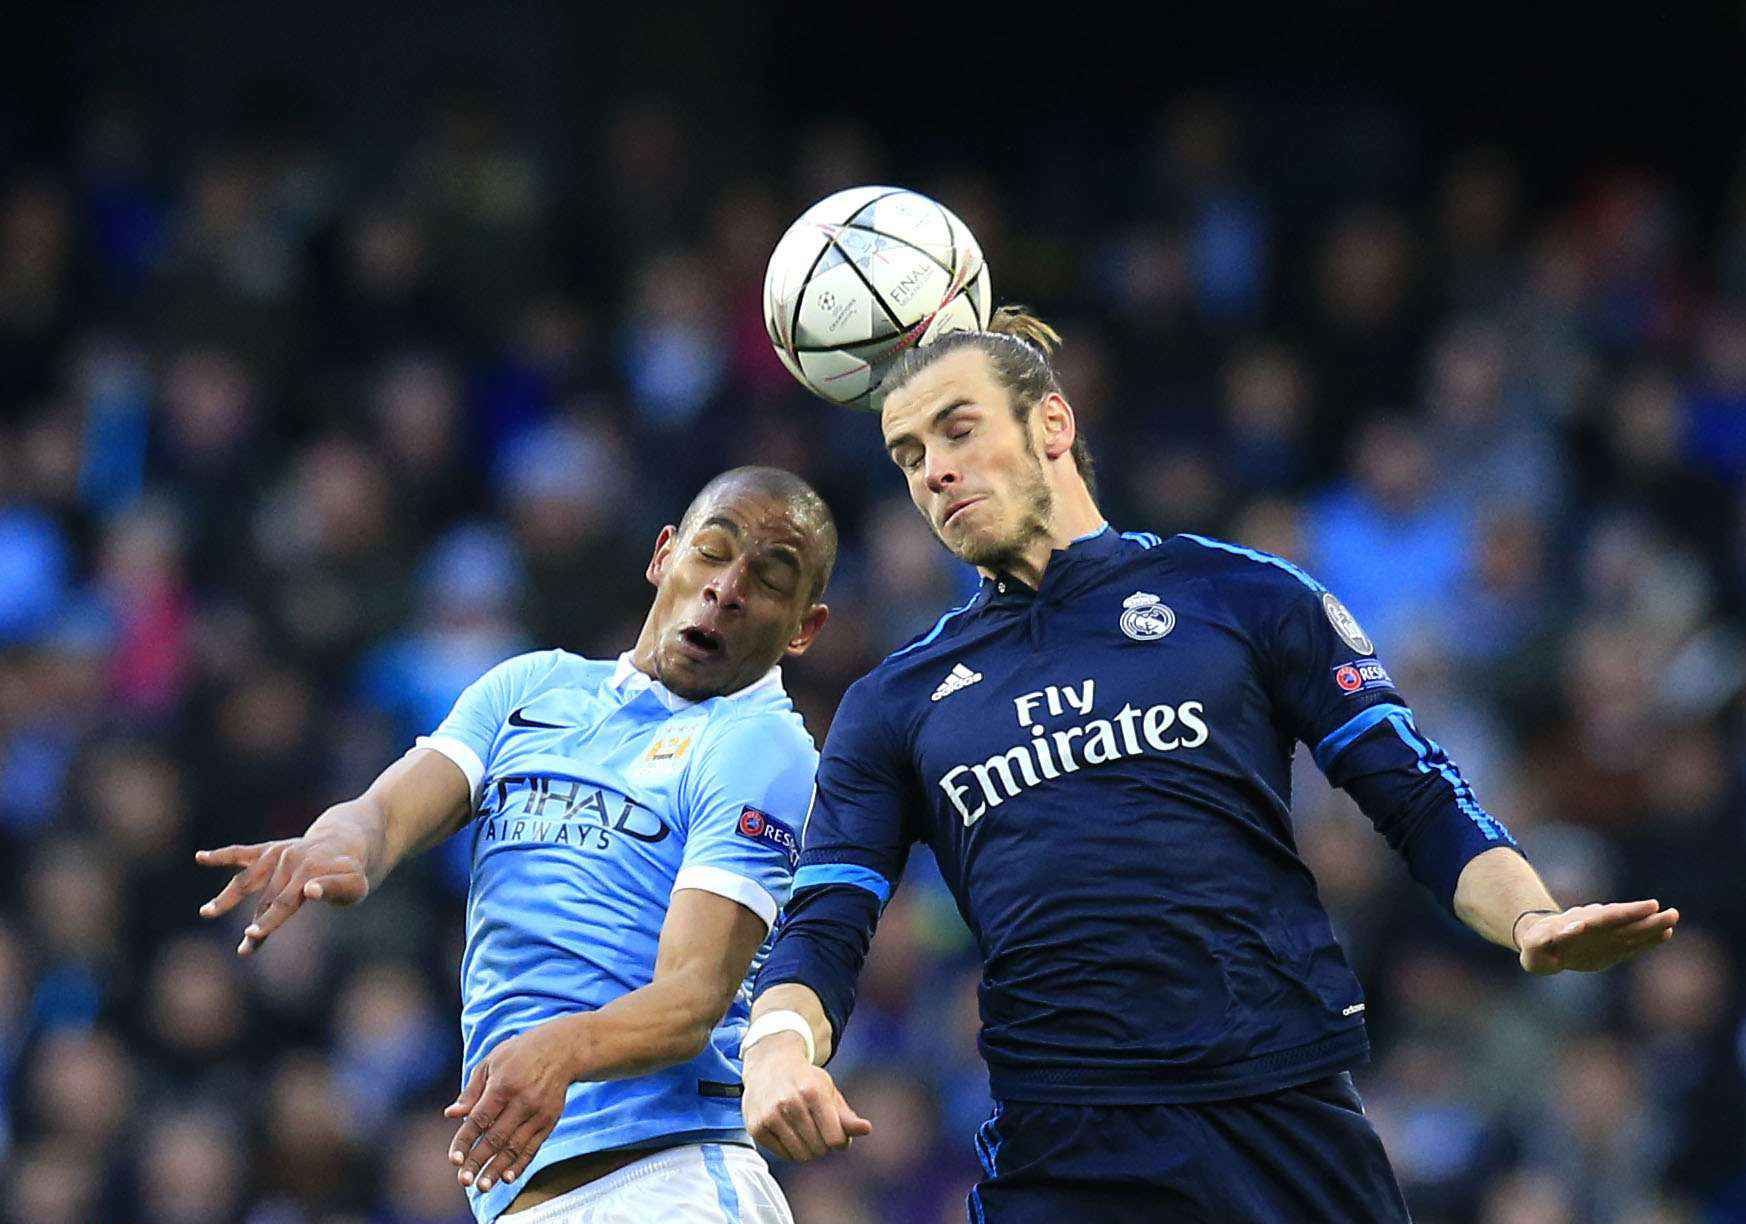 Real Madrid - Manchester City en direct streaming sur beIN Sports 1 dès 20h45